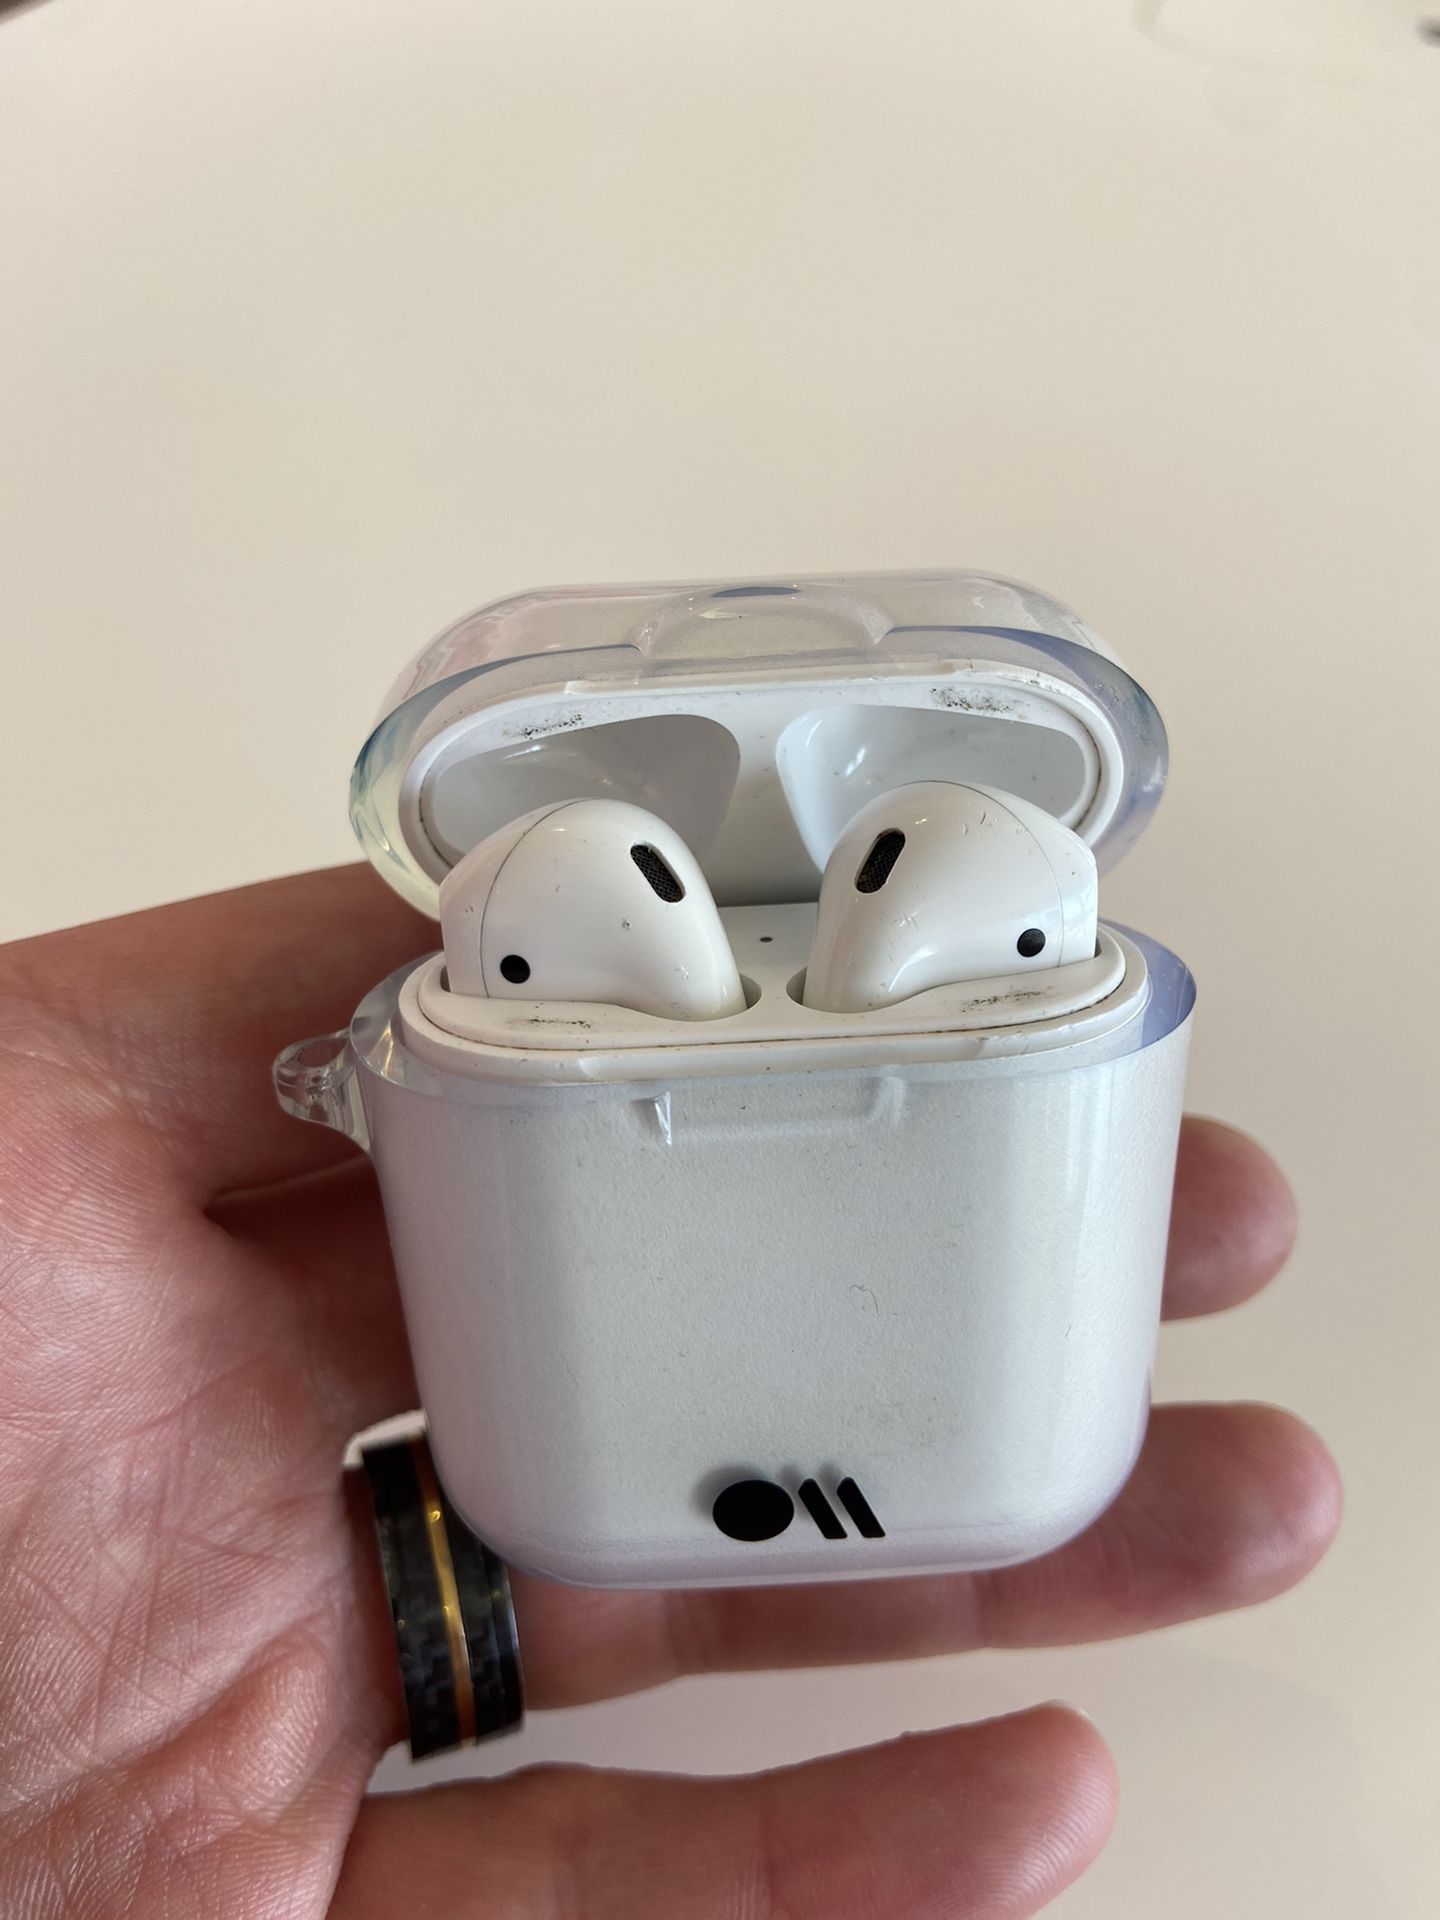 1st Gen AirPods (With Case)